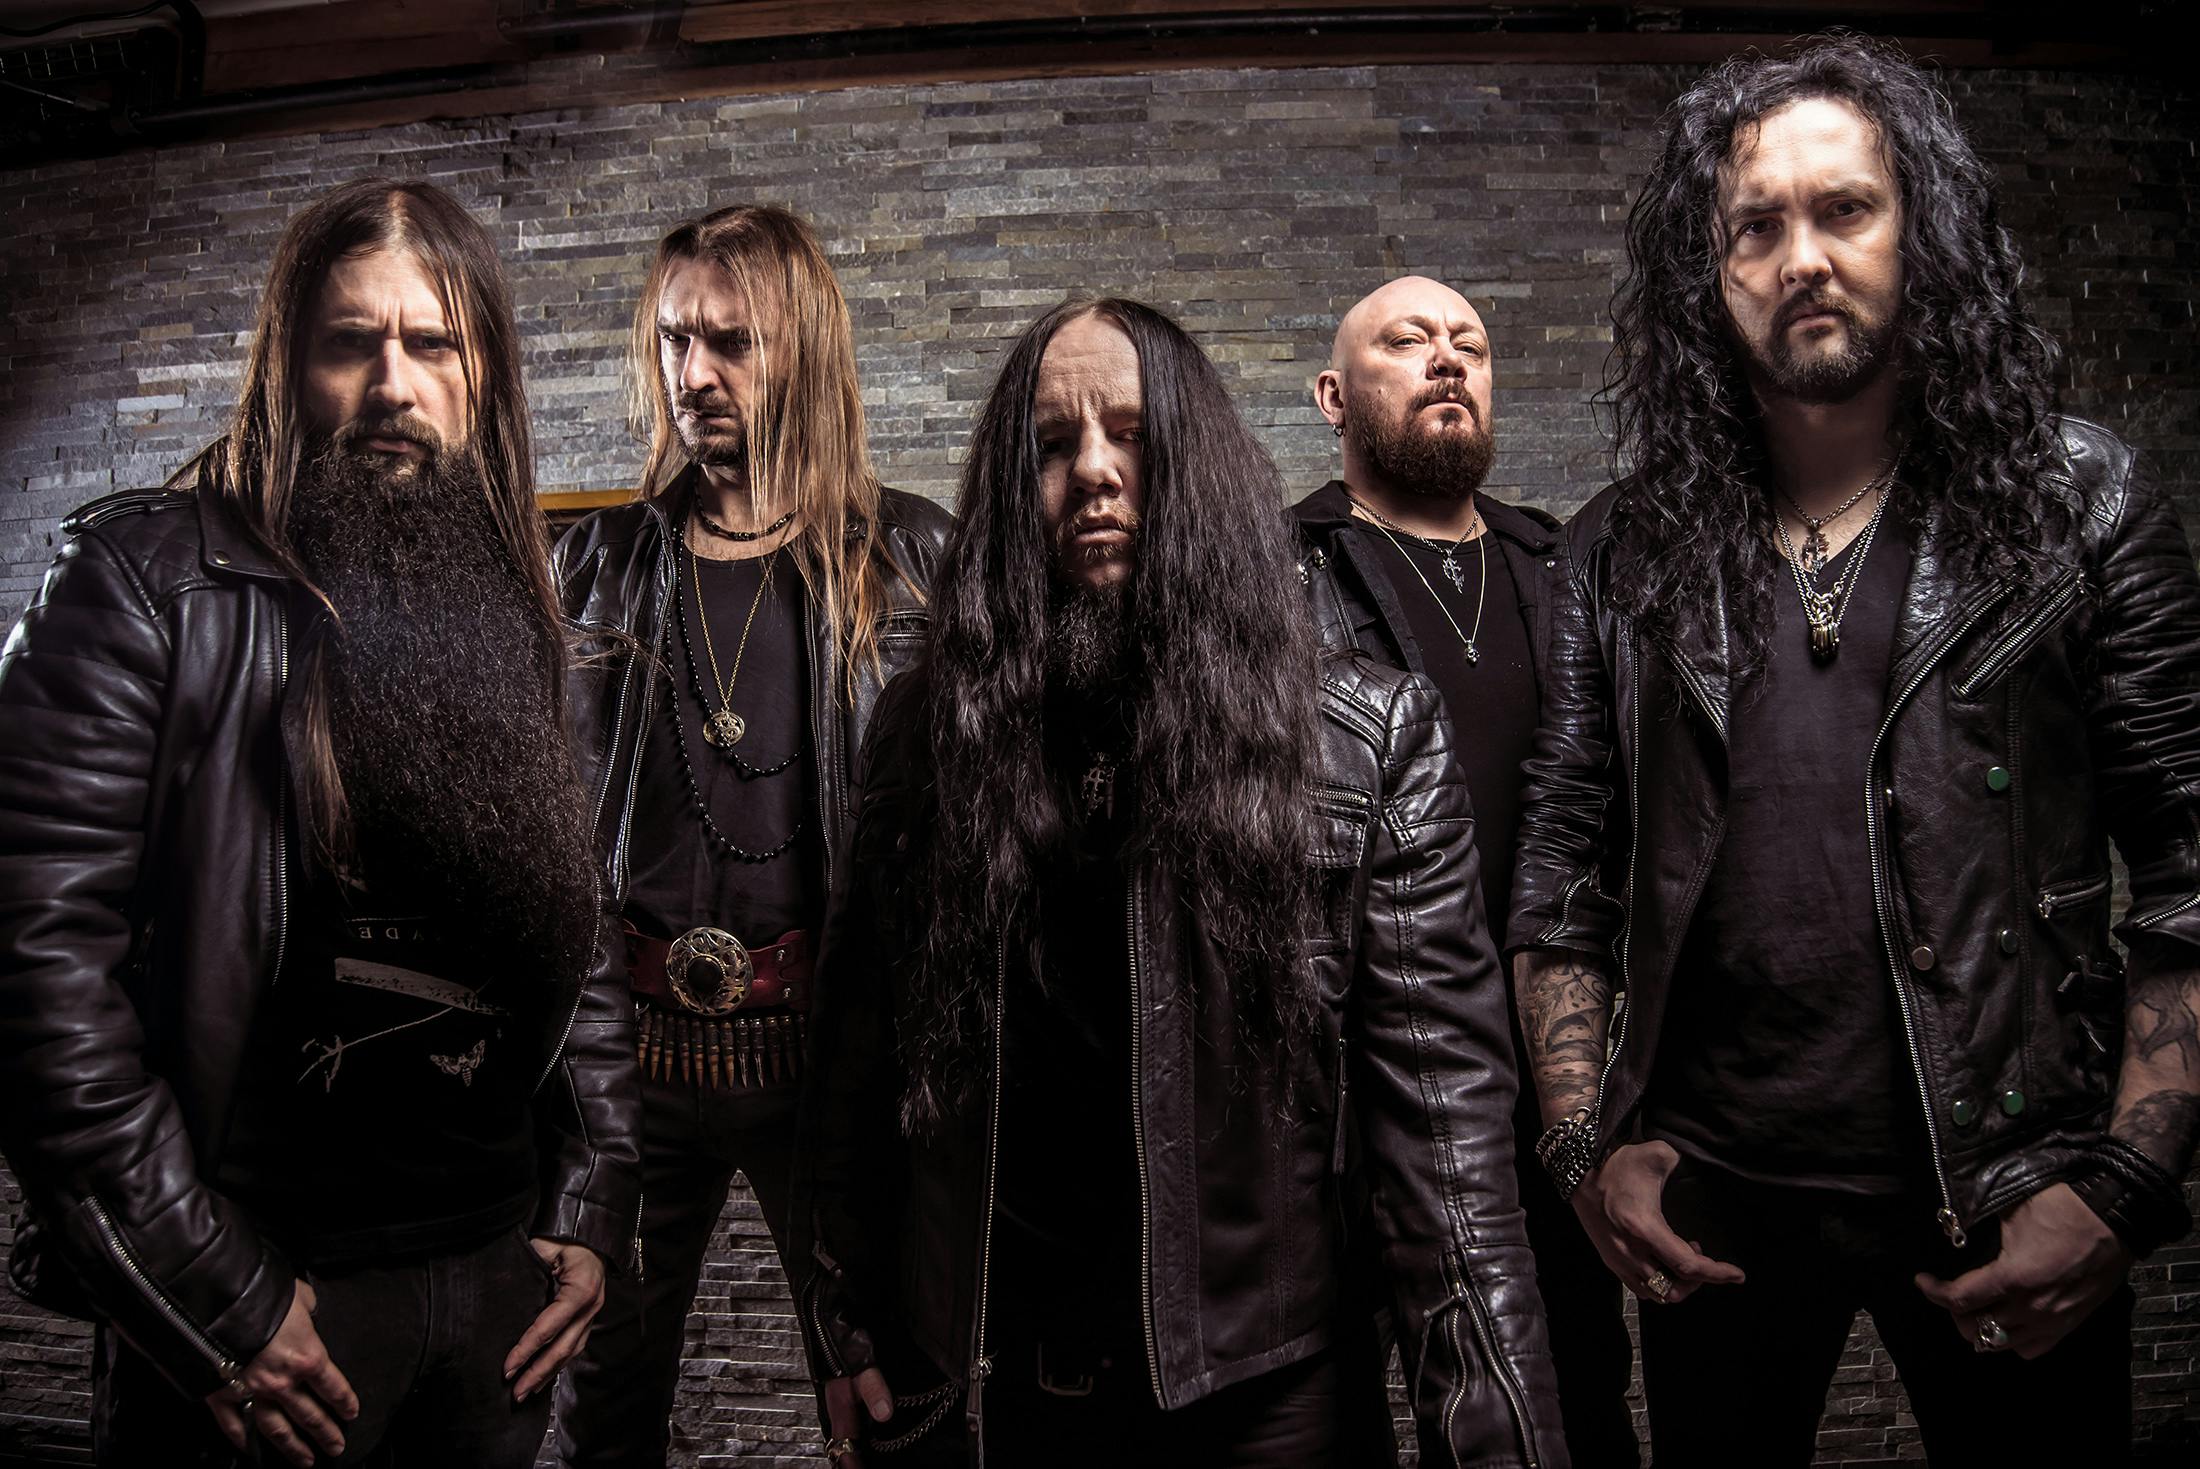 Joey Jordison: "We’re full of hatred and that drives us to do what we do…"